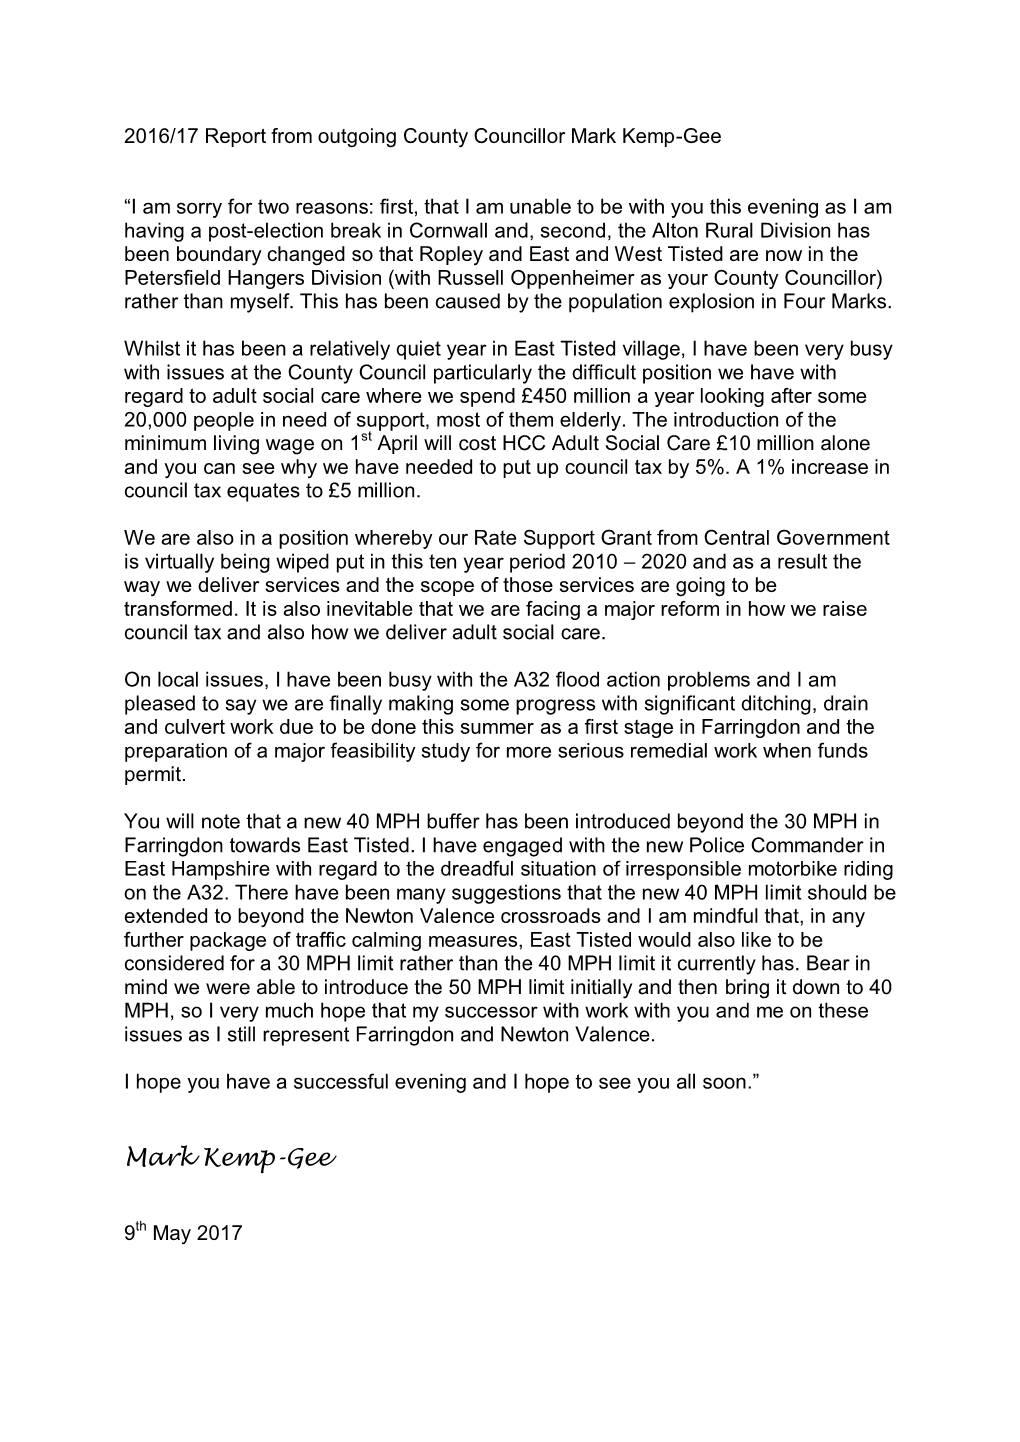 2016/17 Report from Outgoing County Councillor Mark Kemp-Gee